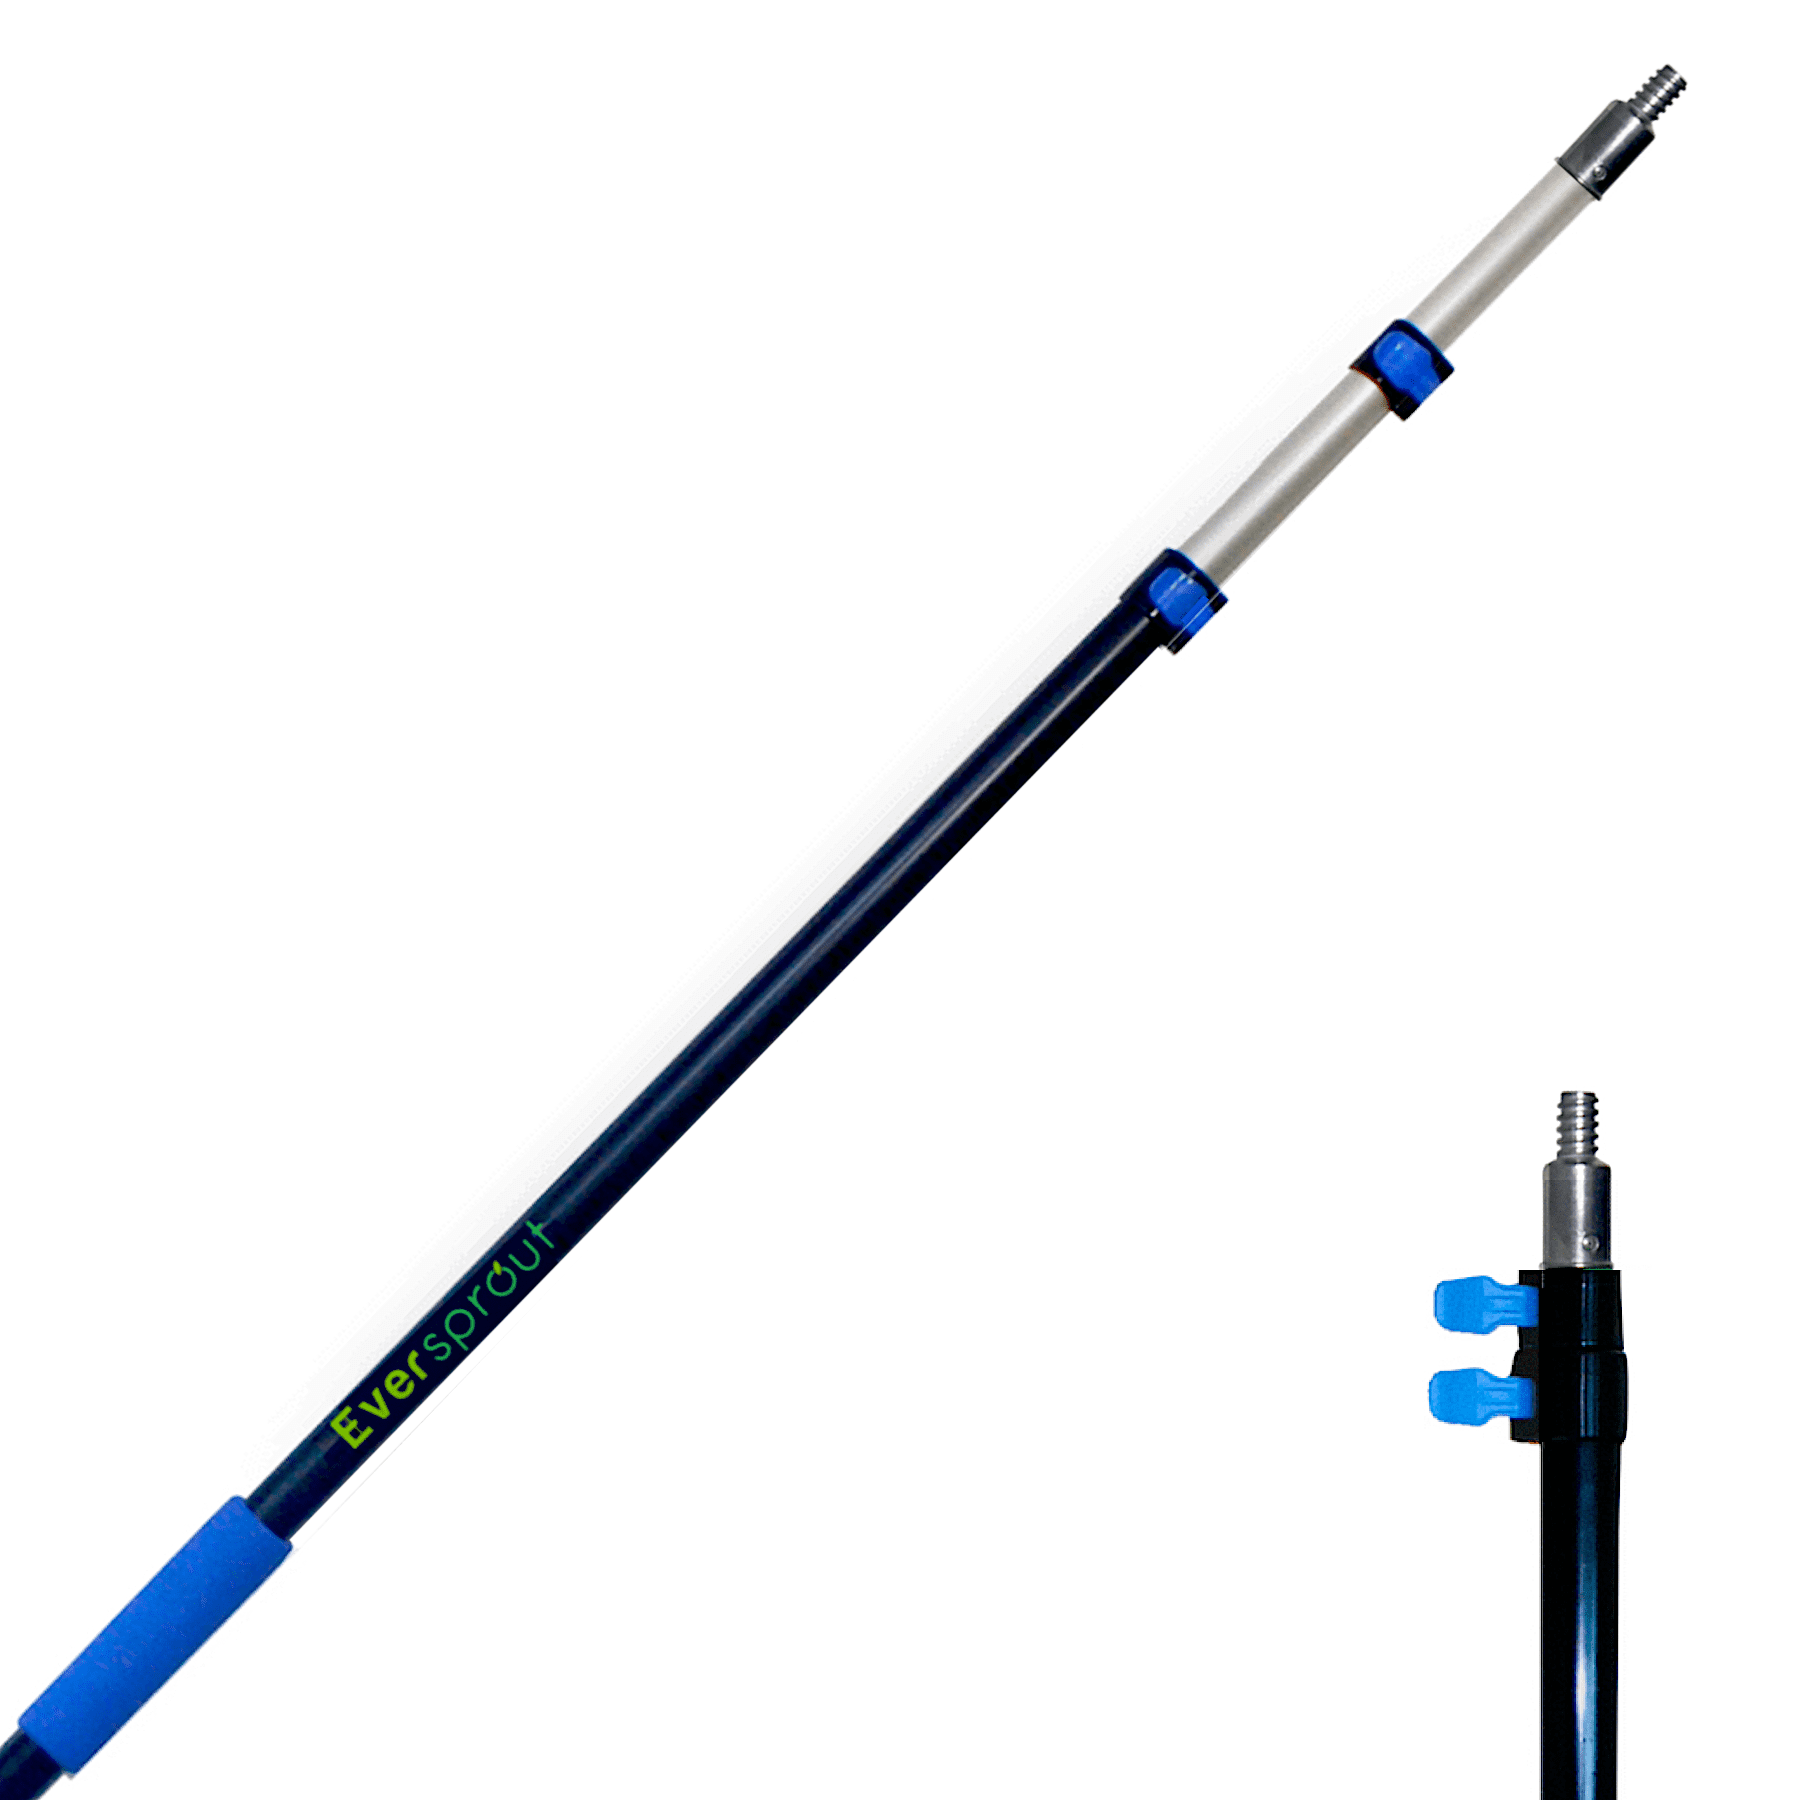 EVERSPROUT 6.5-to-18 Foot Telescopic Extension Pole 